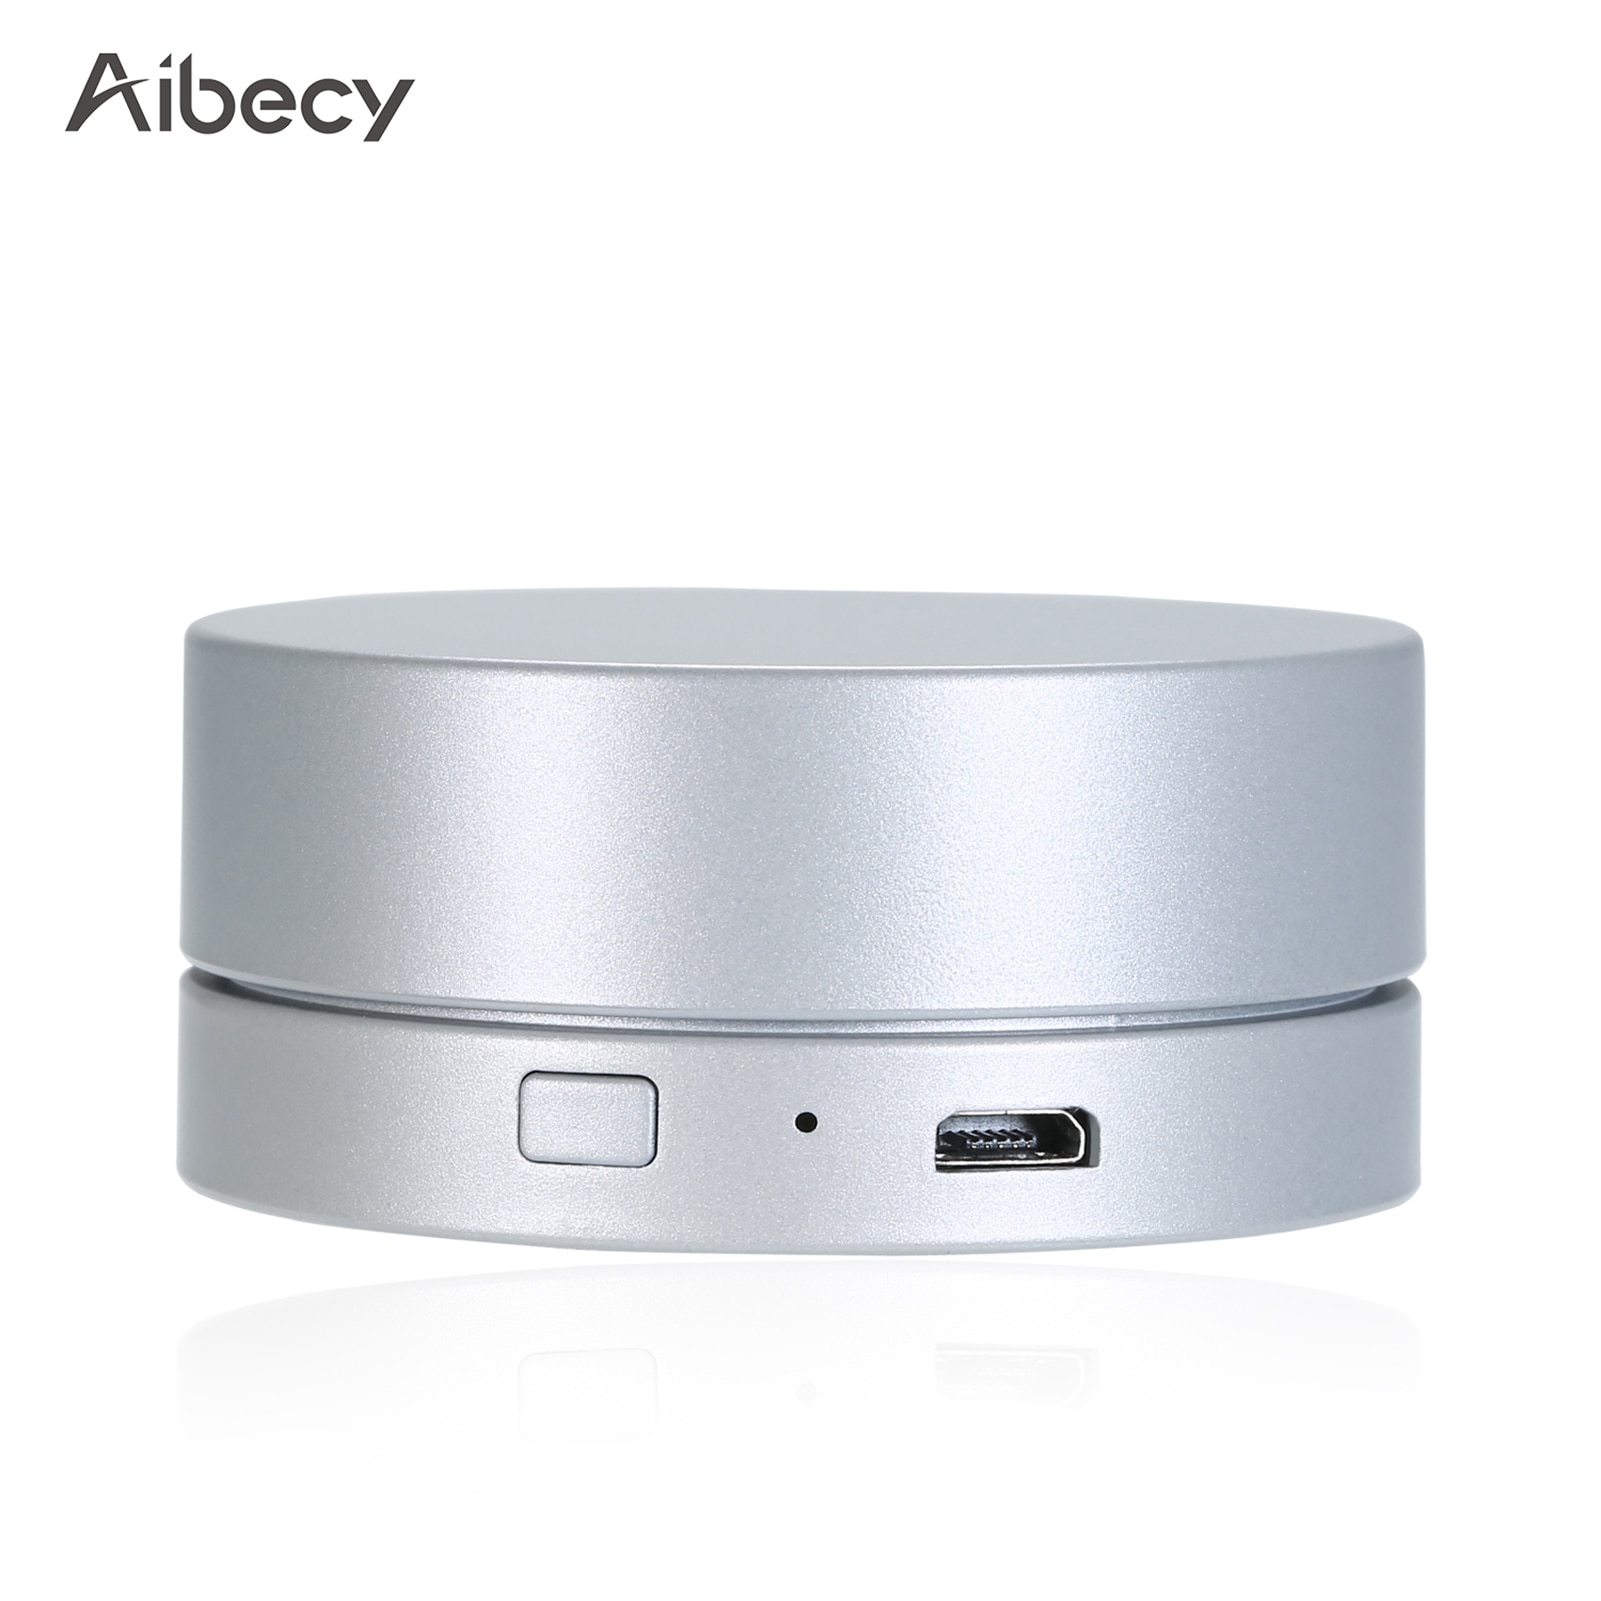 Aibecy Dial Control Turntable USB Controller Knob For Microsoft Surface Wacom/BOSTO/Huion Graphic PC/Laptop(Only for Windows 10)